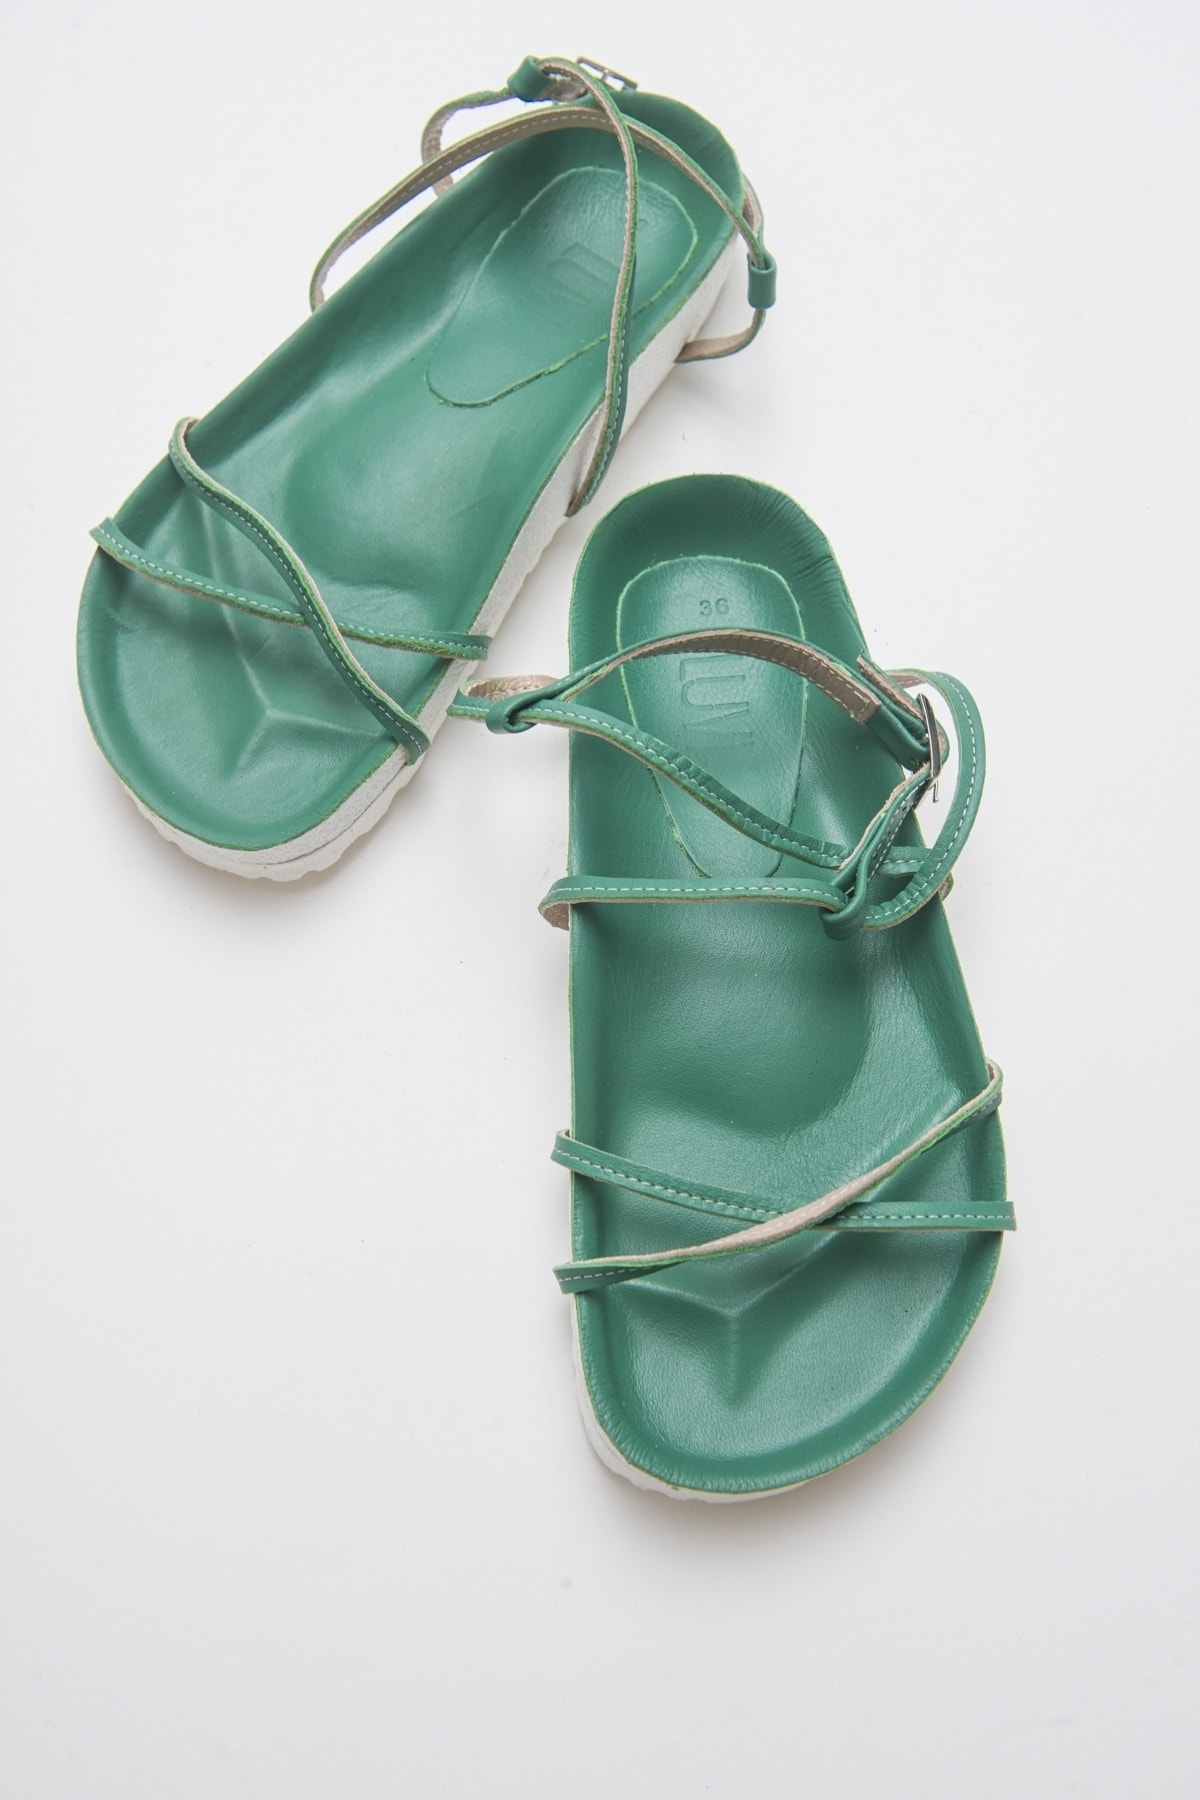 Levně LuviShoes Muse Women's Green Genuine Leather Sandals